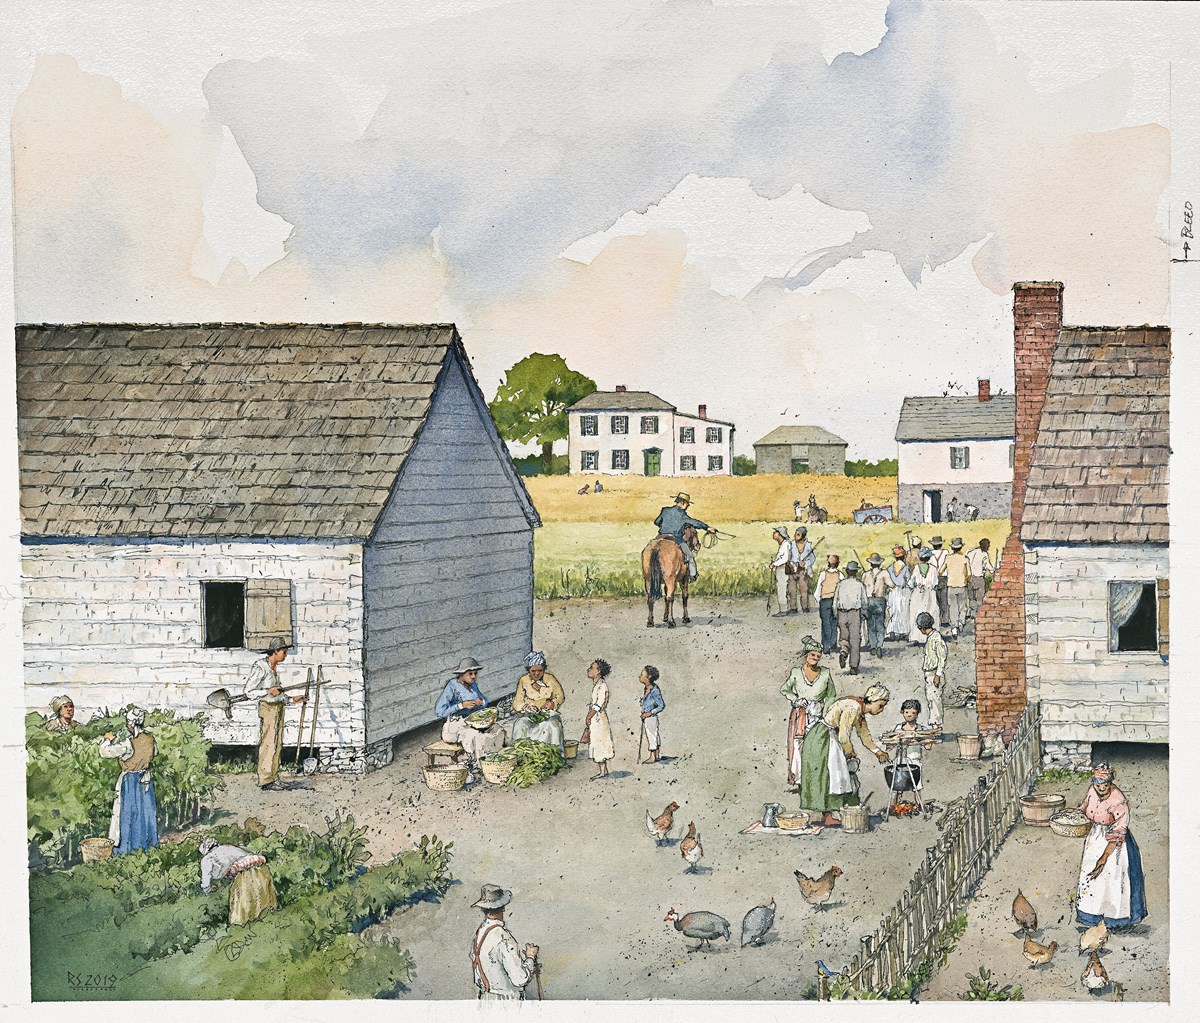 Artist's rendering of daily life in L'Hermitage slave village.